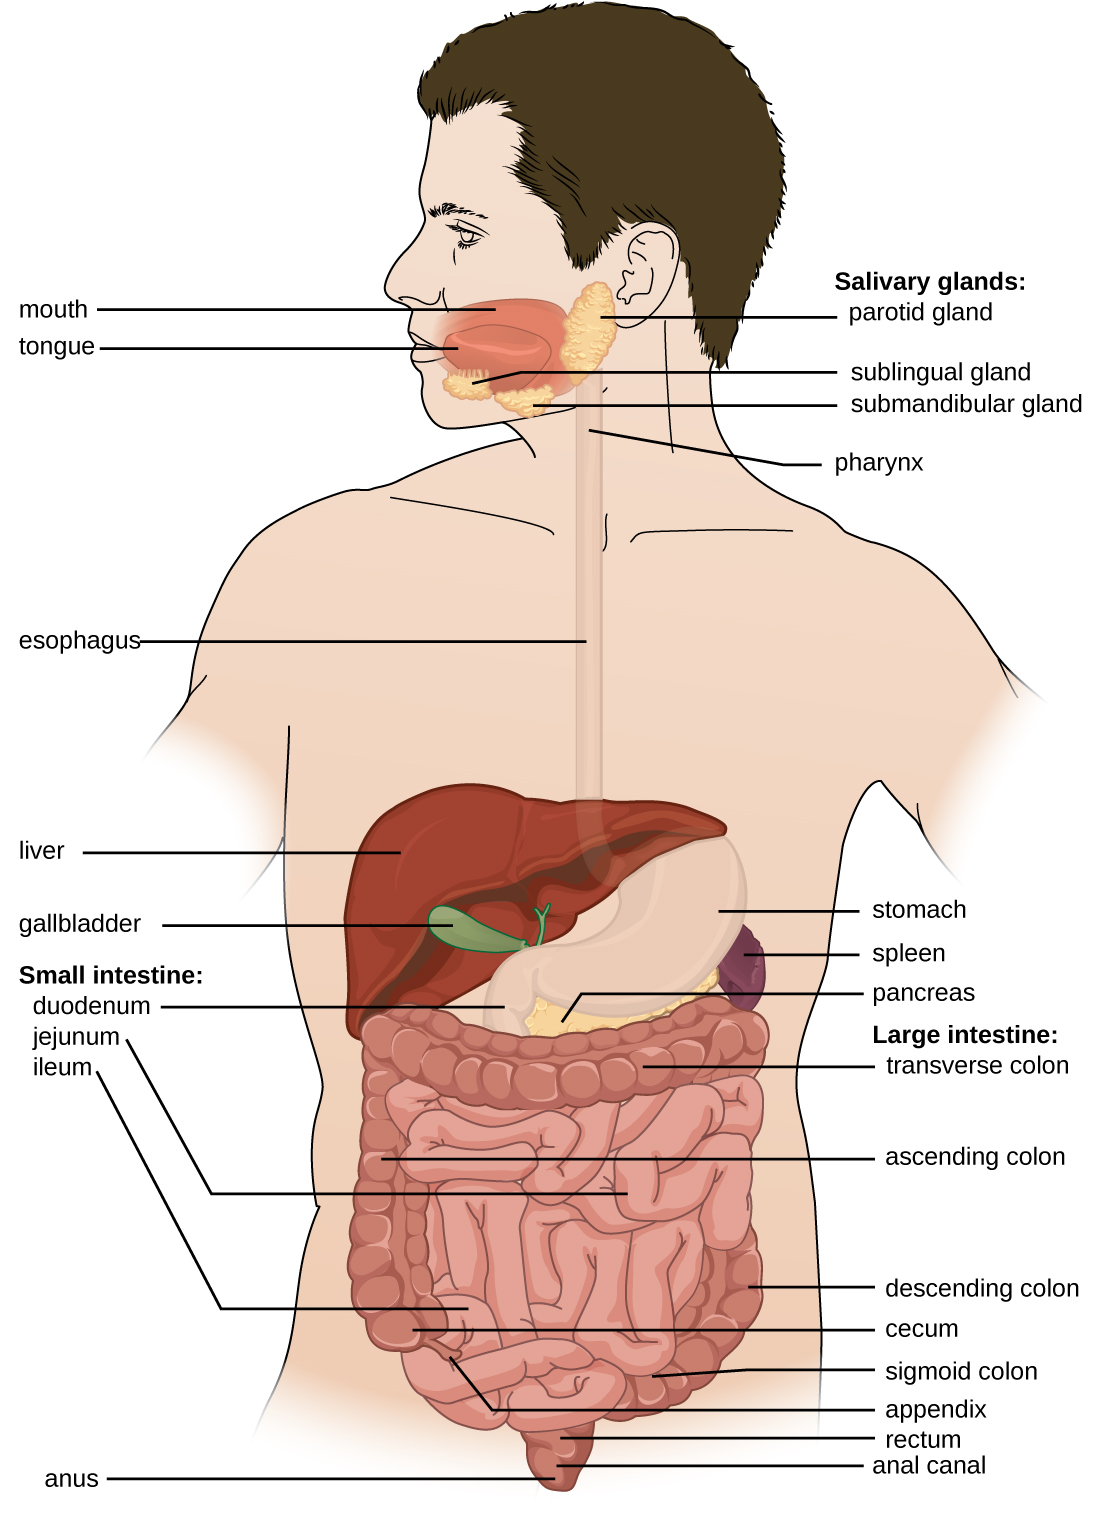 Anatomy and Normal Microbiota of the Digestive System · Microbiology